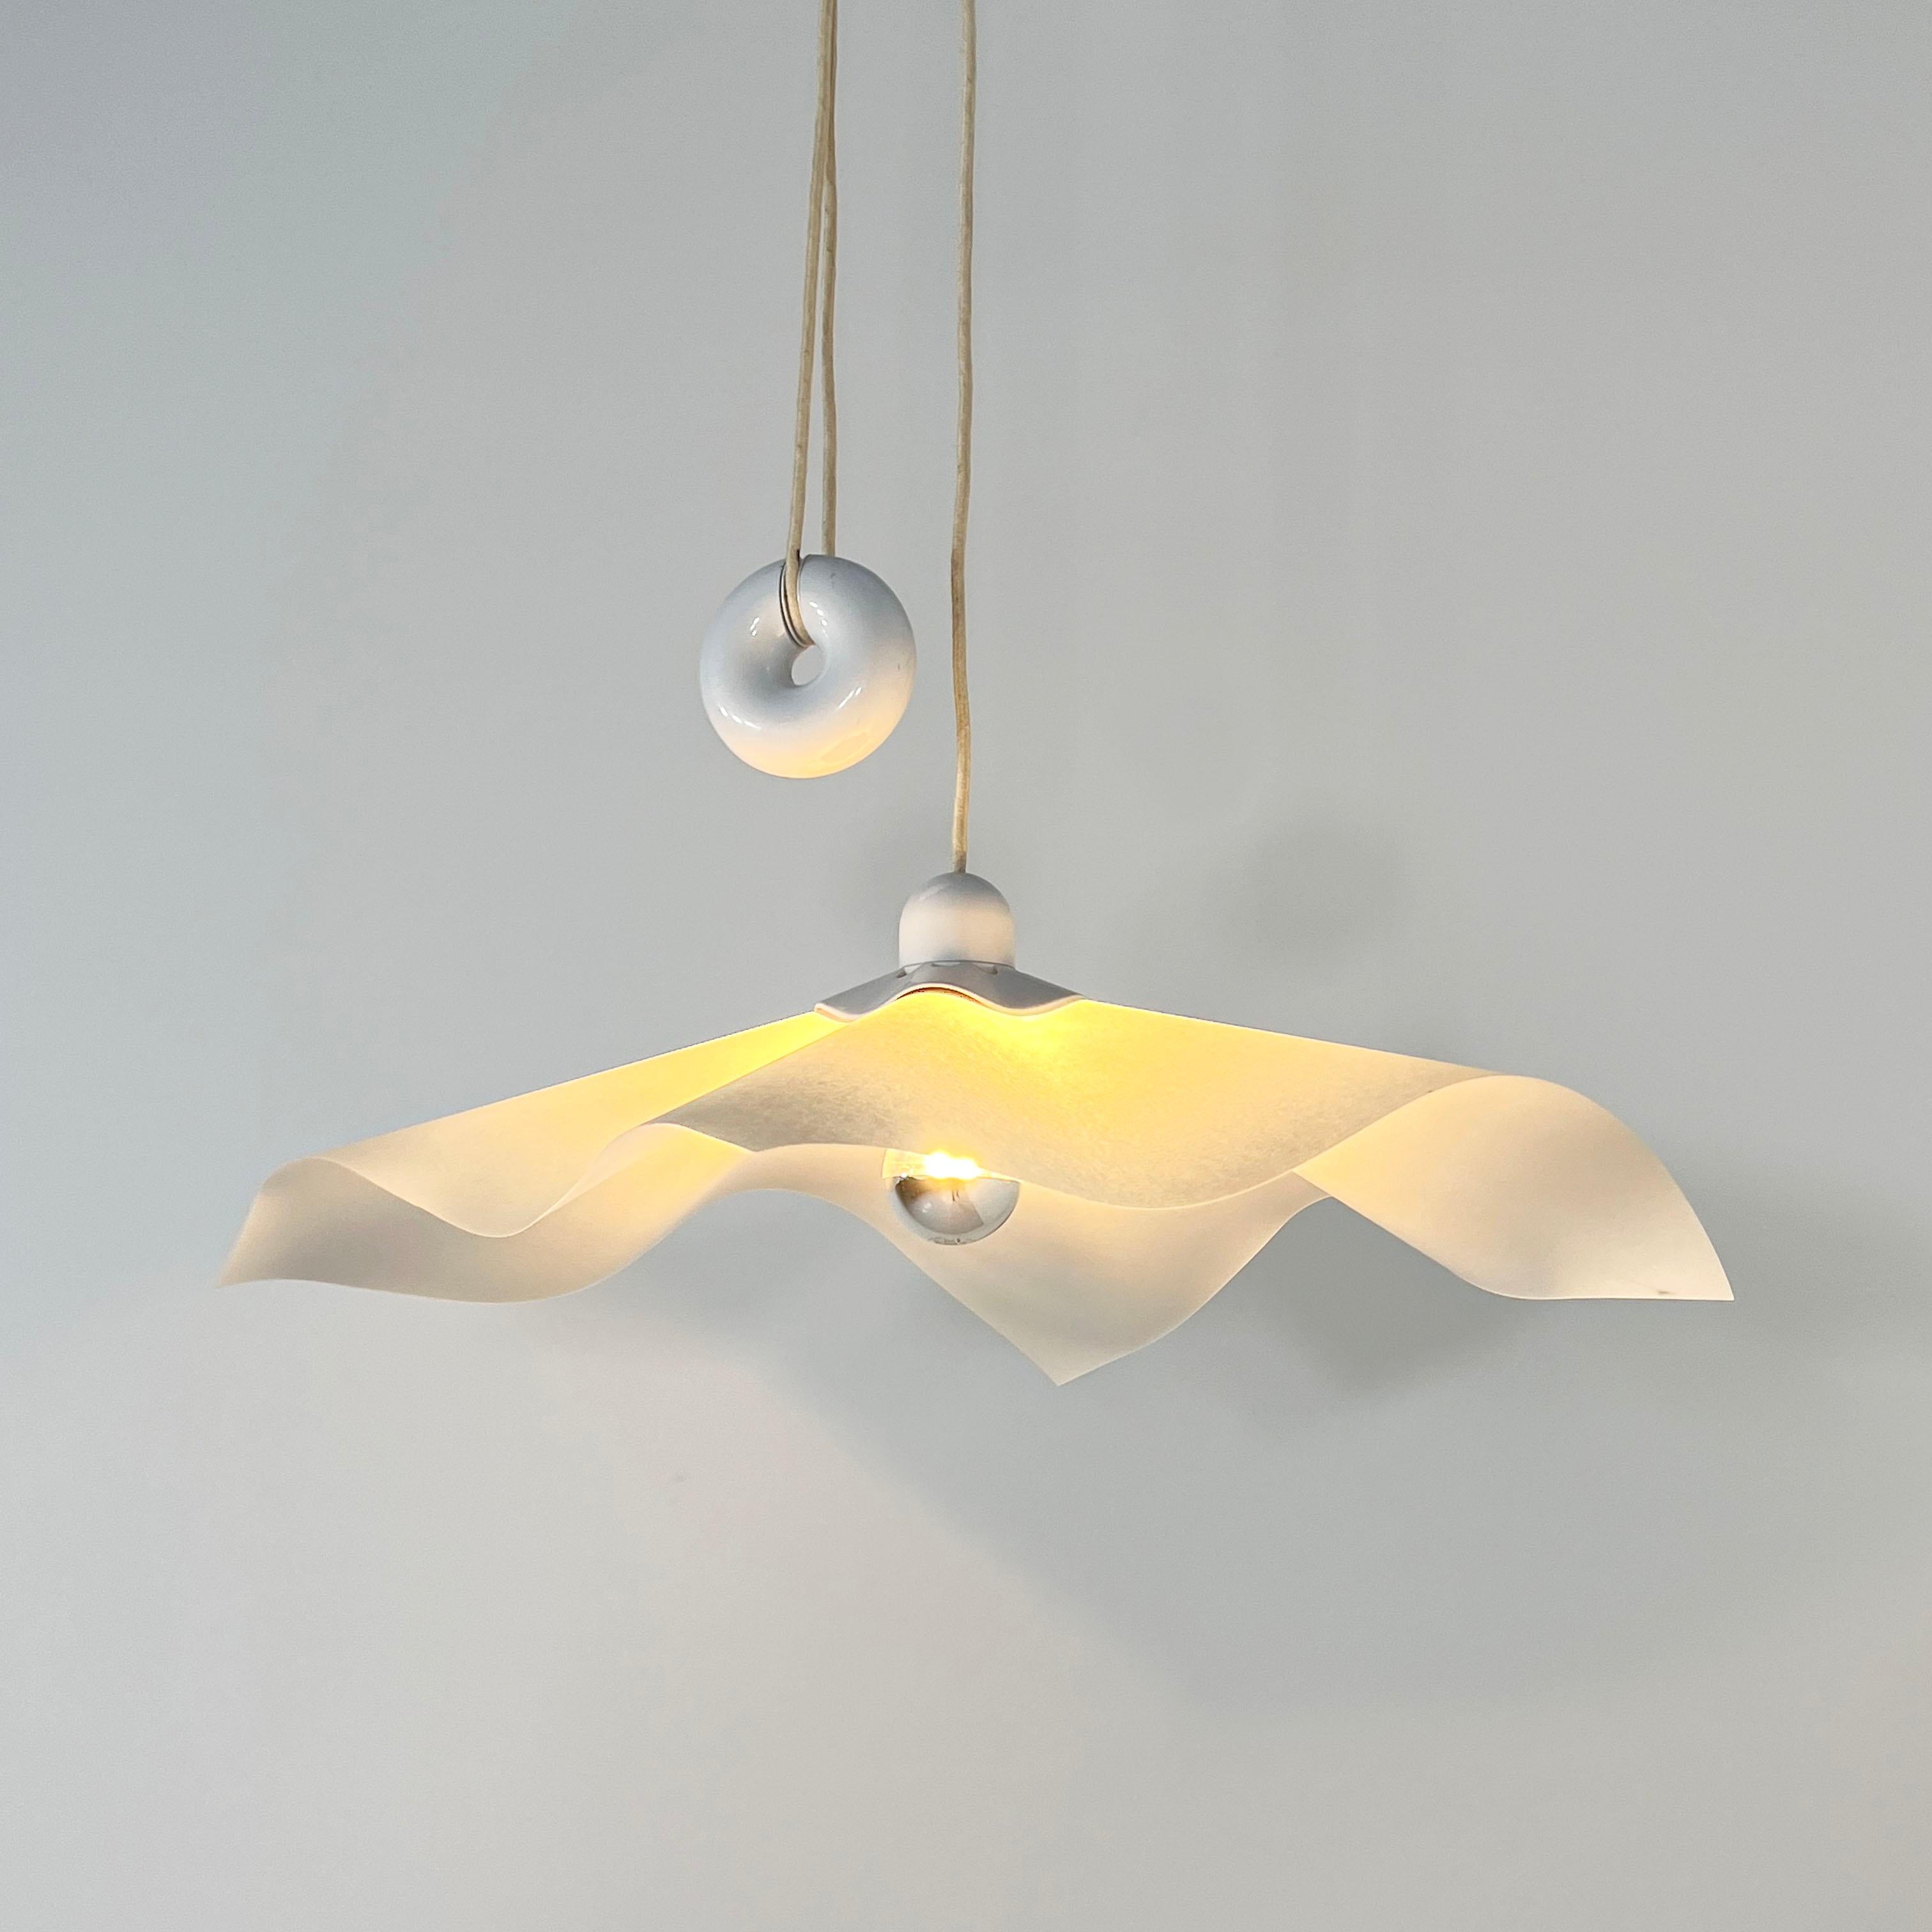 Designer - Mario Bellini
Producer - Artemide
Model - Area 50 Ceiling Light
Design Period - Seventies
Measurements - Width 64 cm x Depth 64 cm x Height 160 cm (Wire)
Materials - Metal, Paper
Color - White
Light wear consistent with age and use. Good